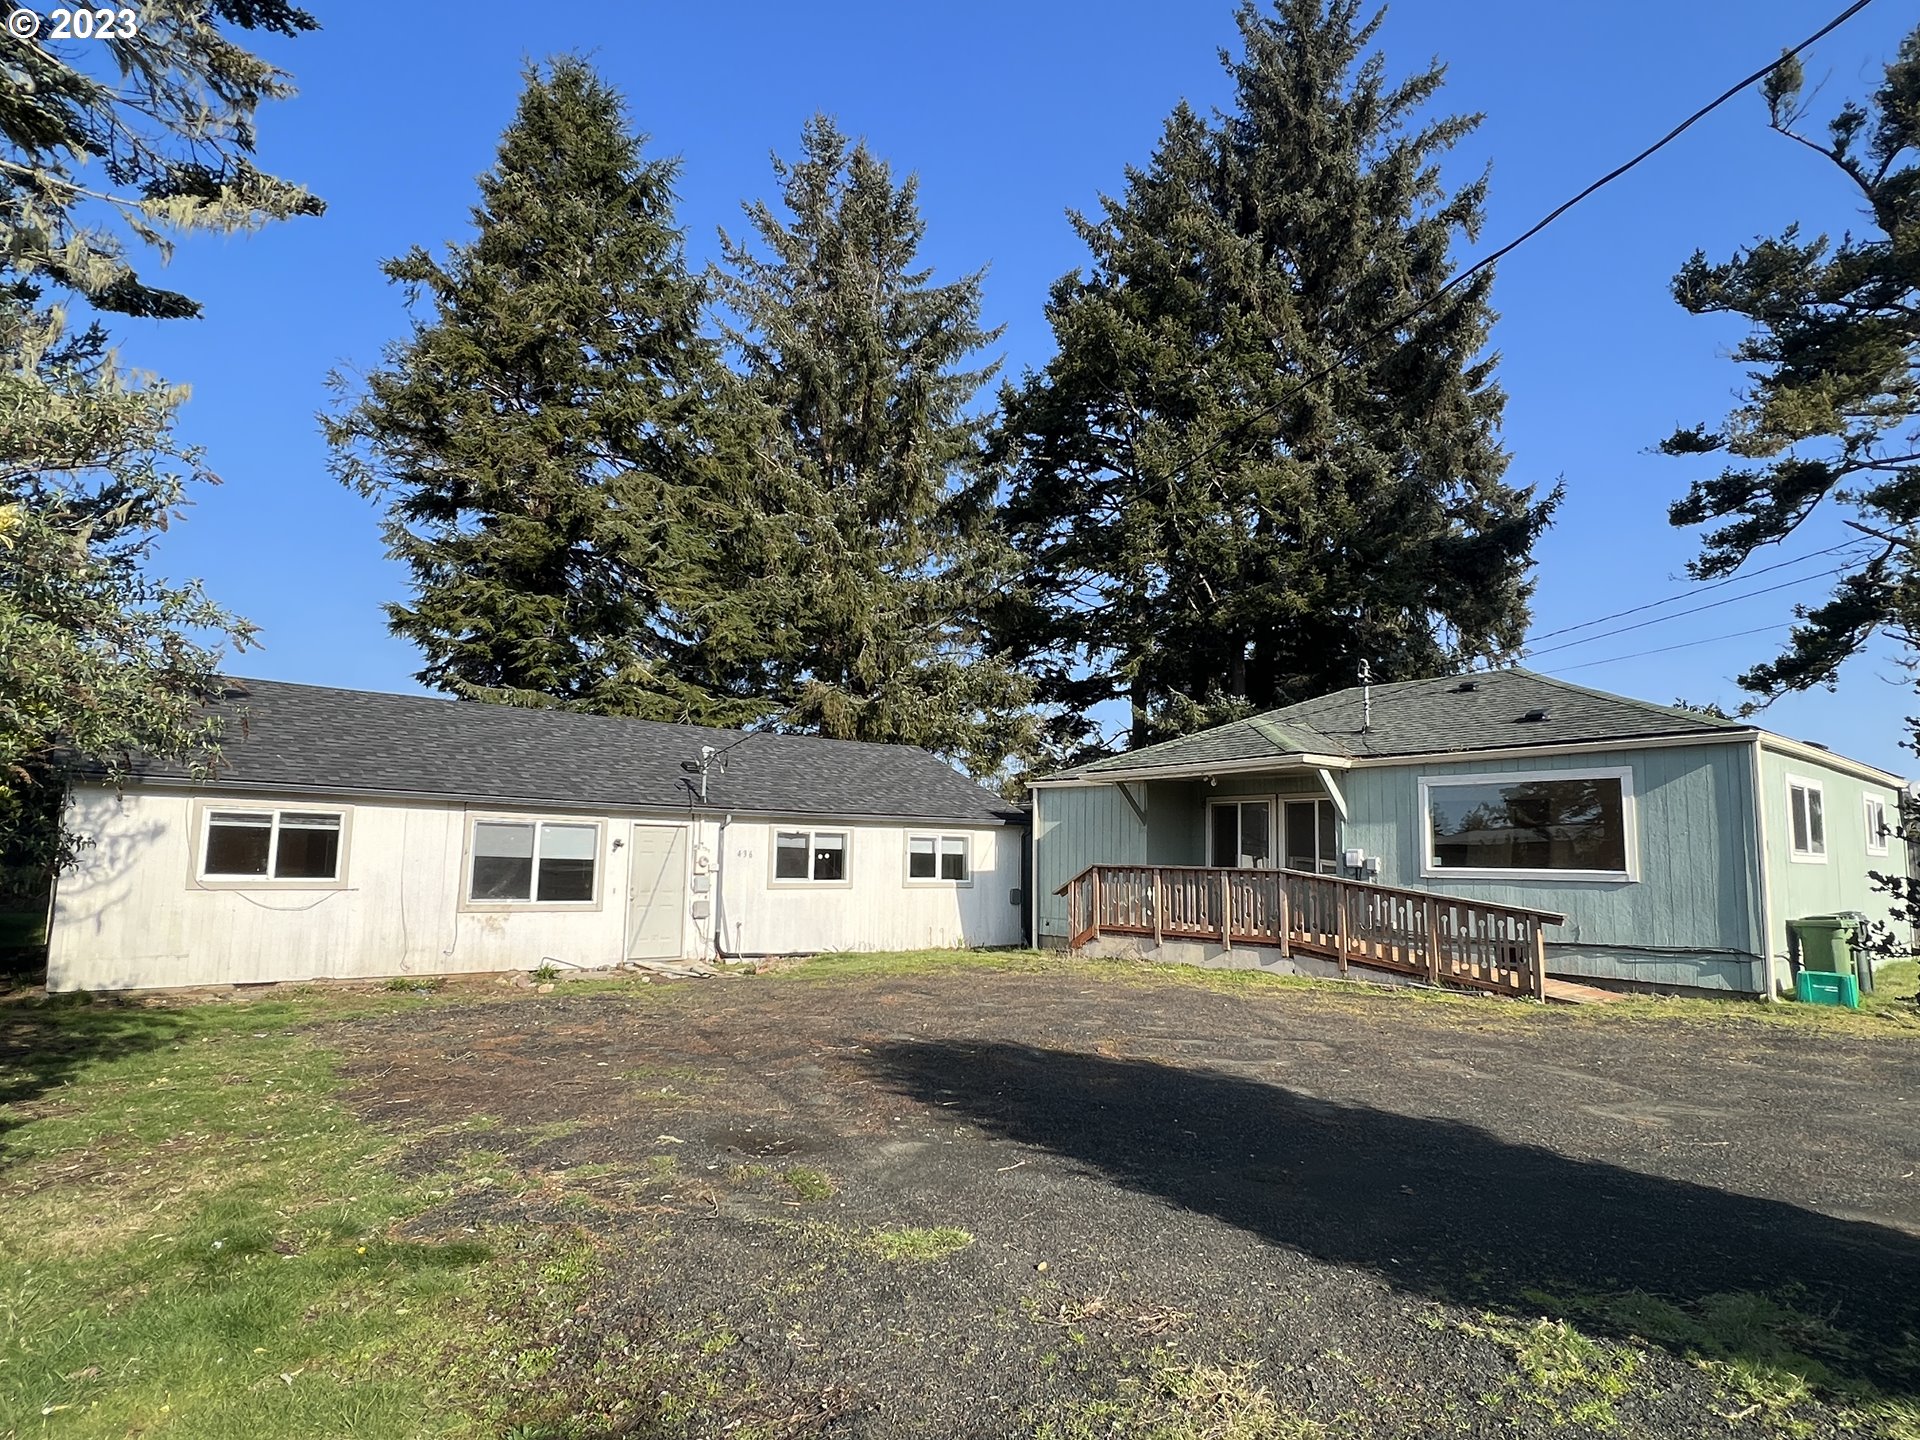 436 S WASSON ST, Coos Bay, OR 97420